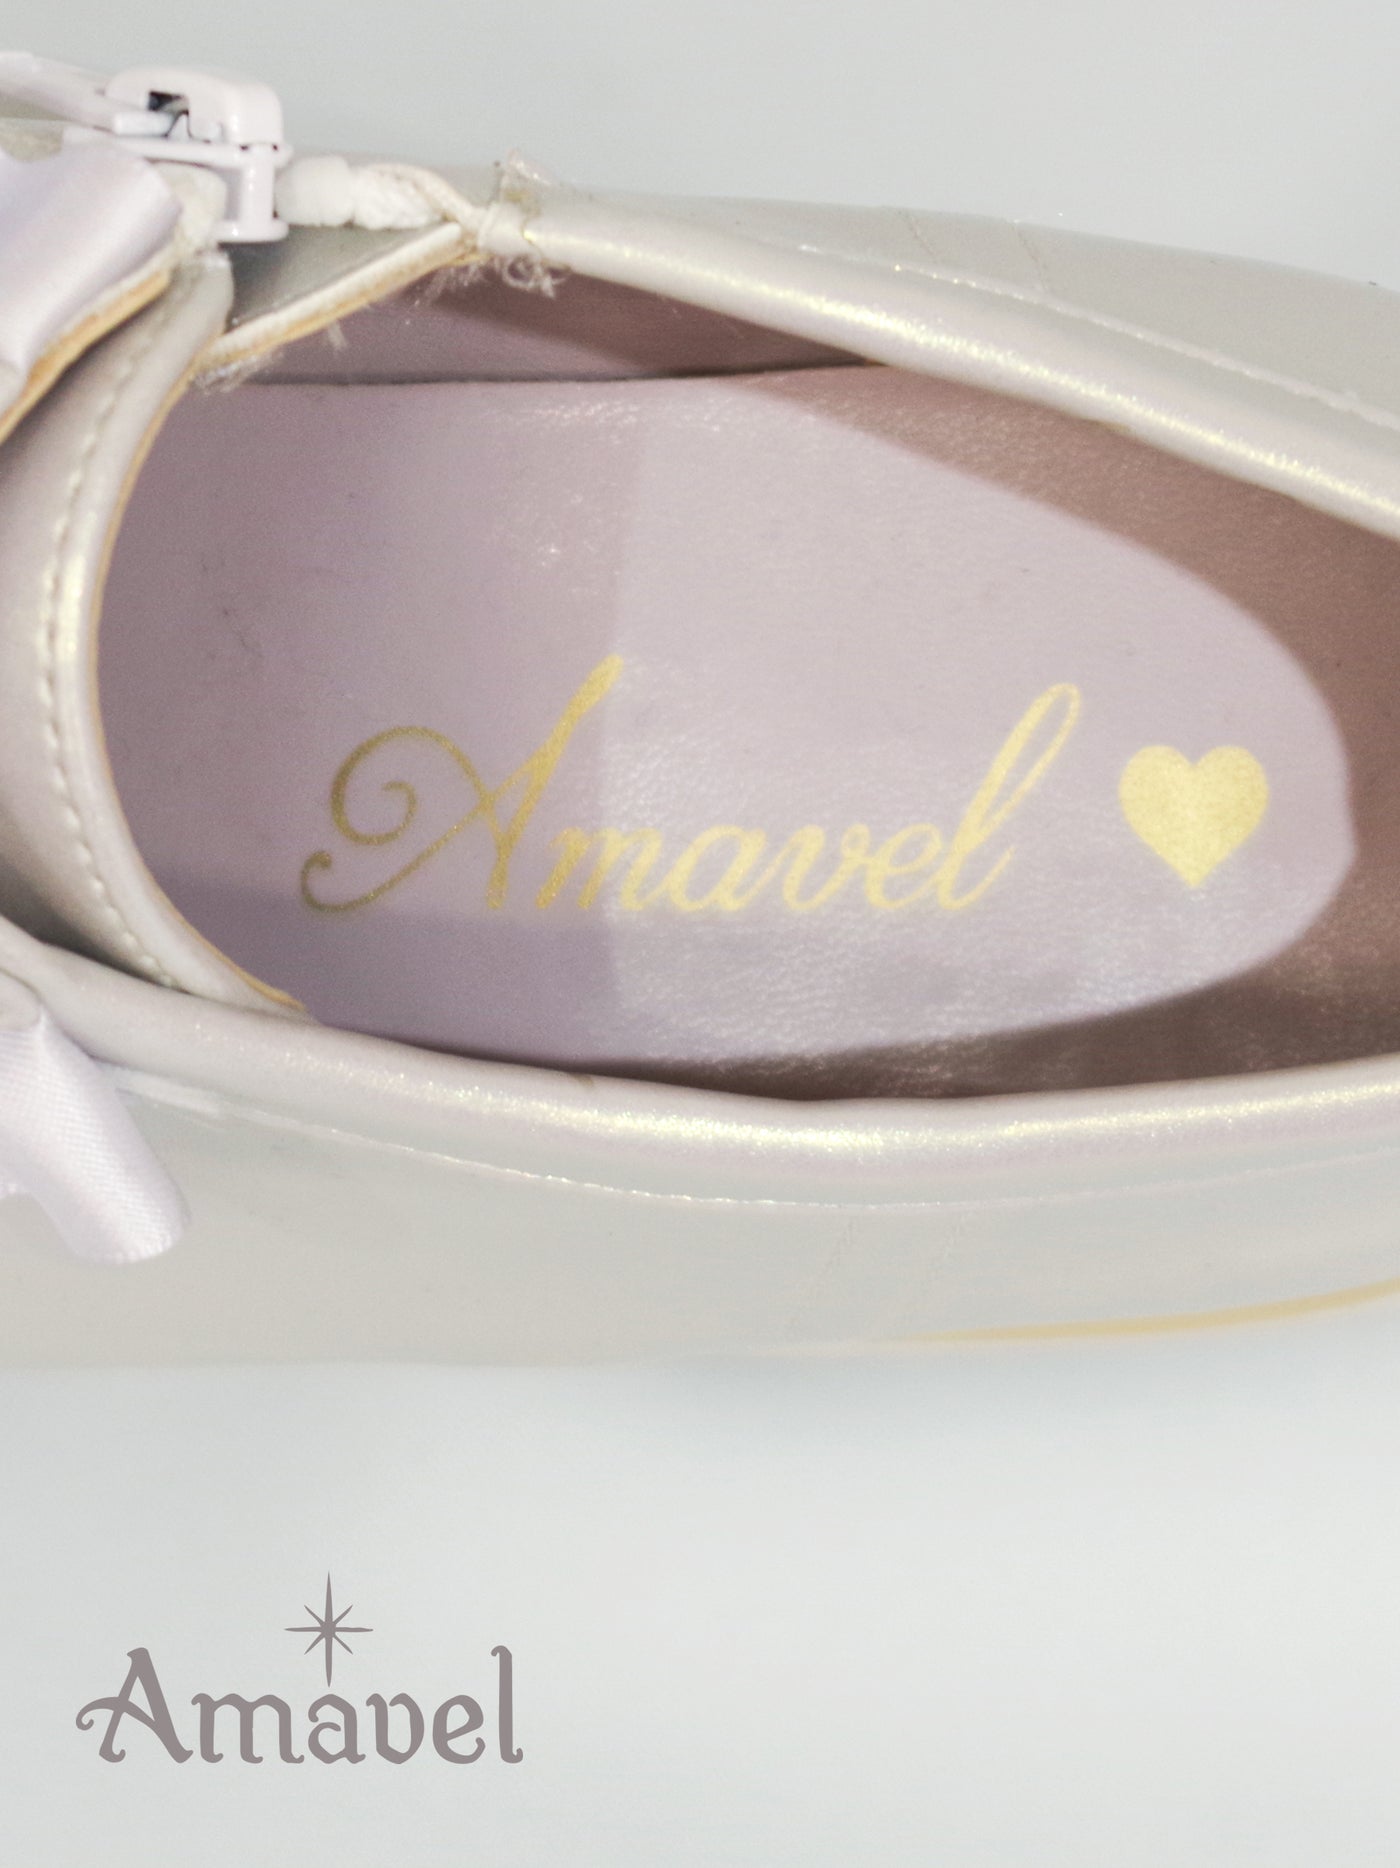 Frilled shoes with bijou ribbon